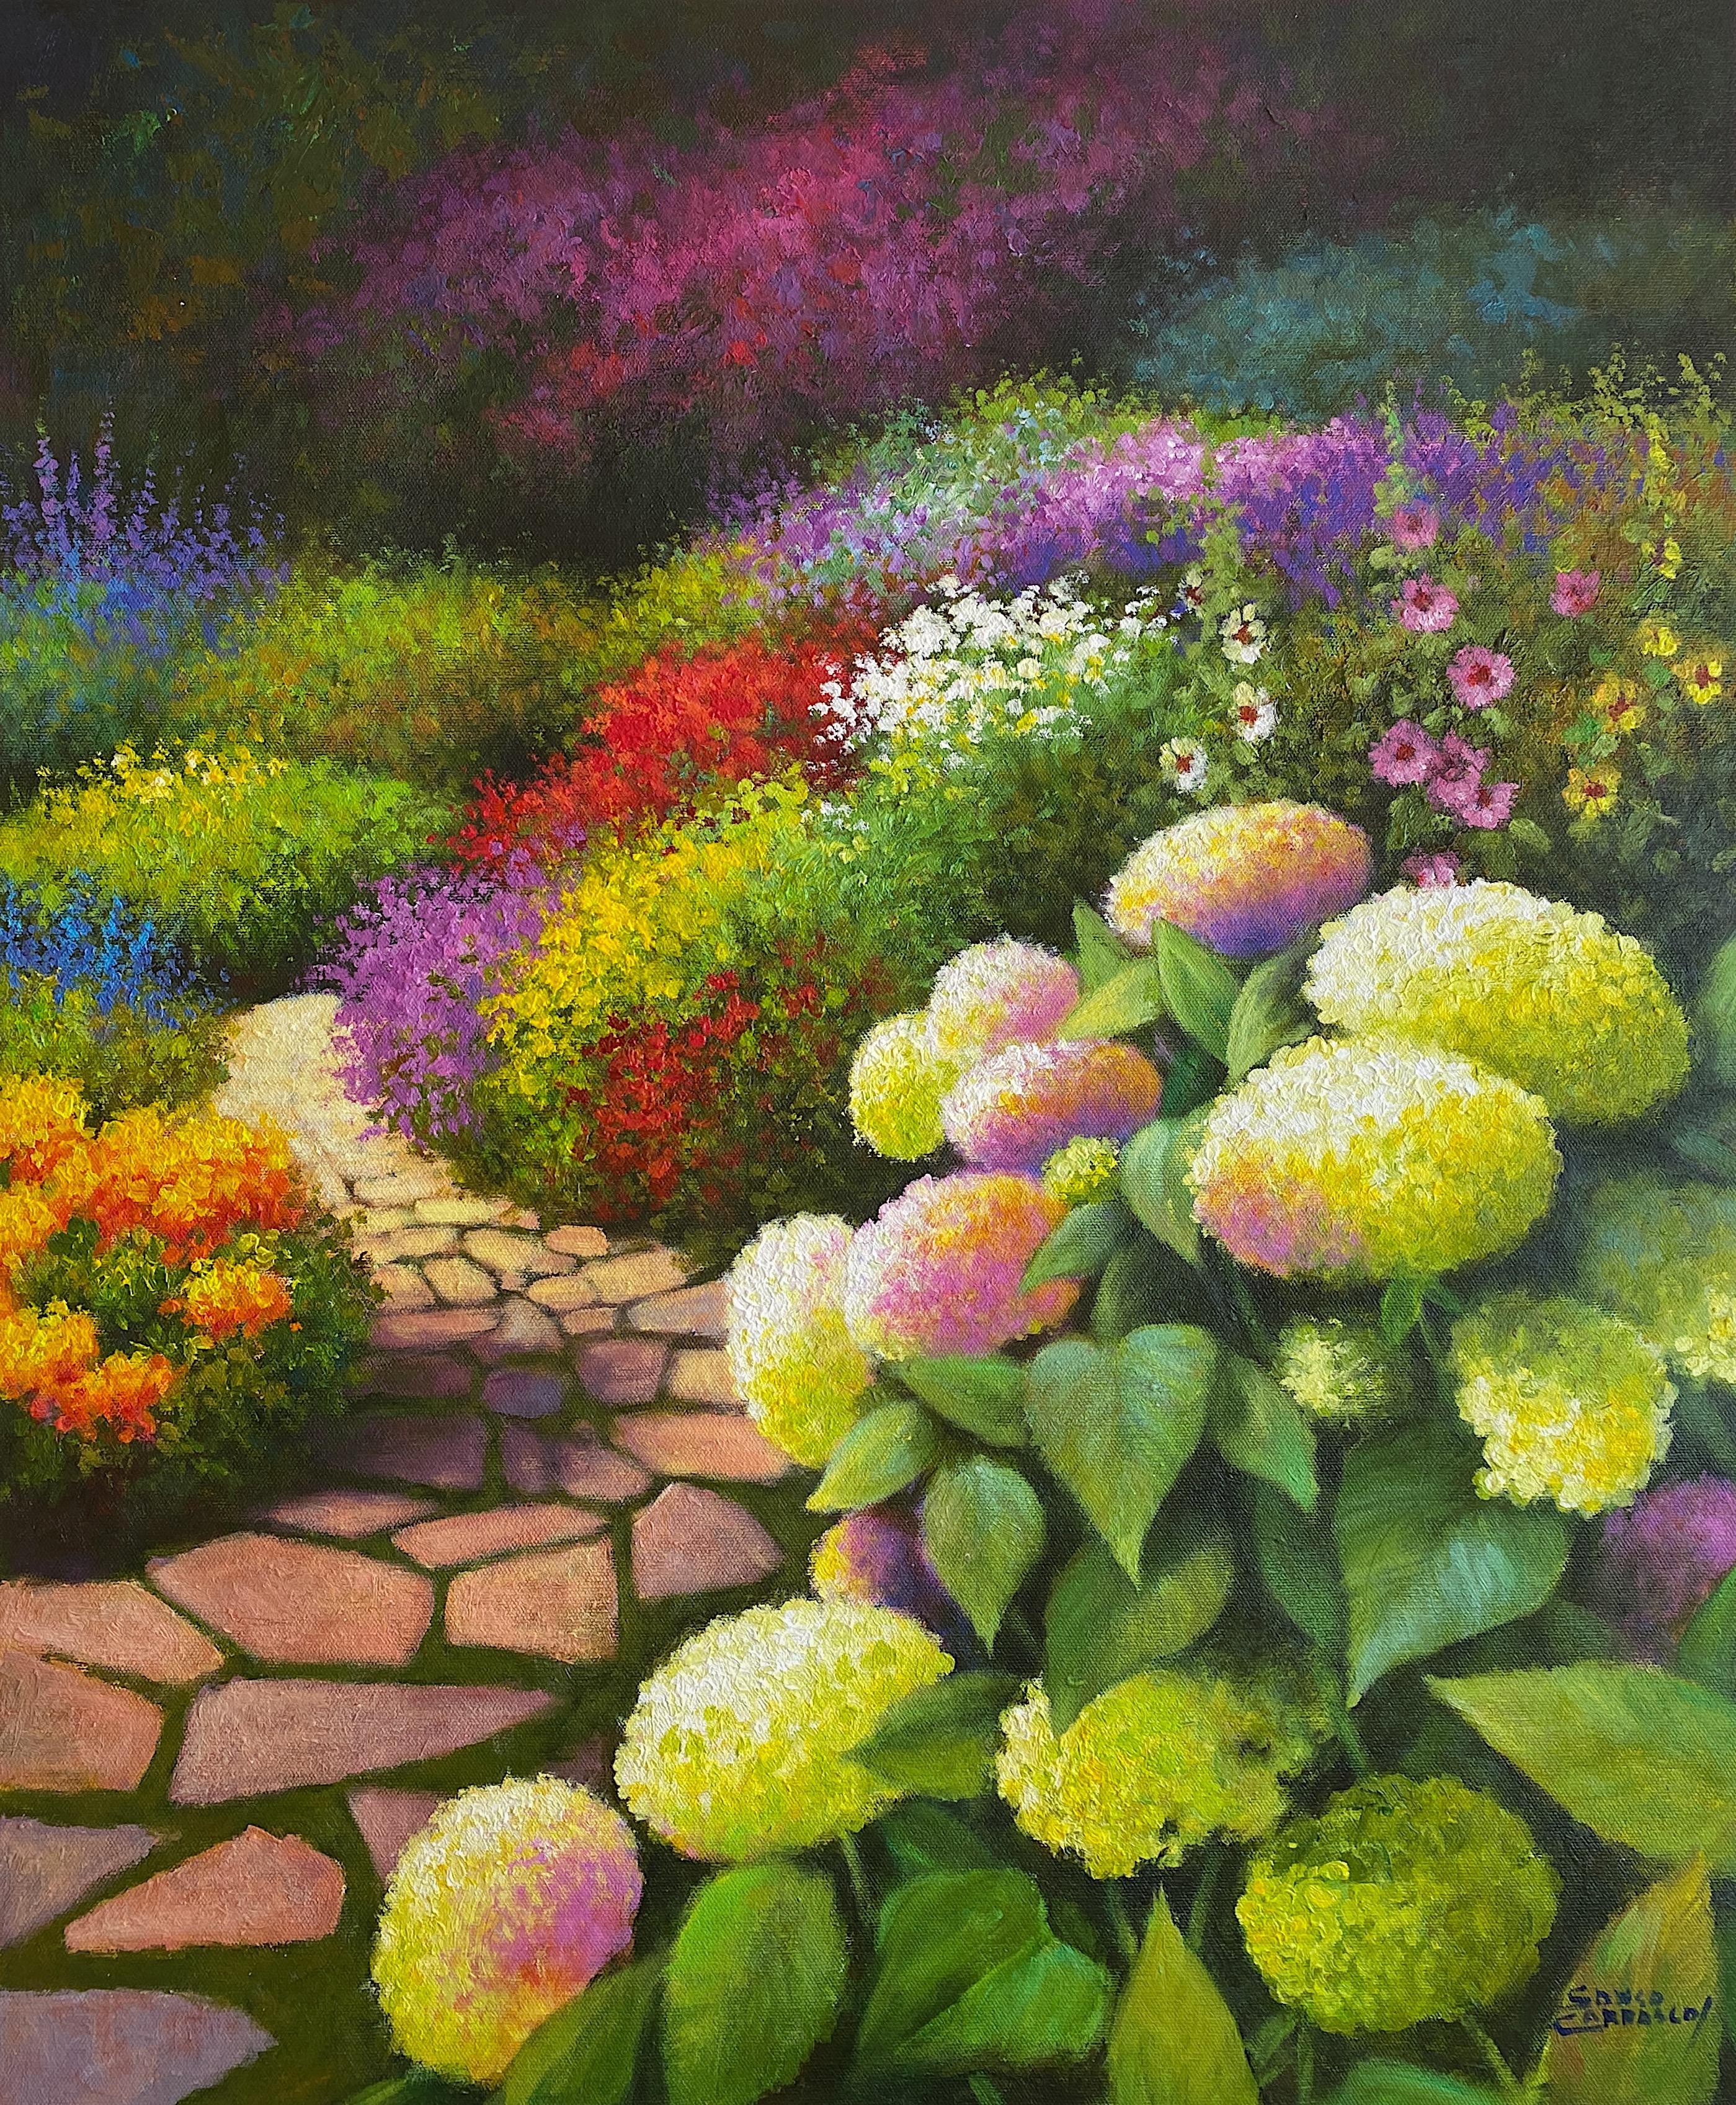 Sonco Carrasco Landscape Painting - Spring garden - Acrylic oil painting